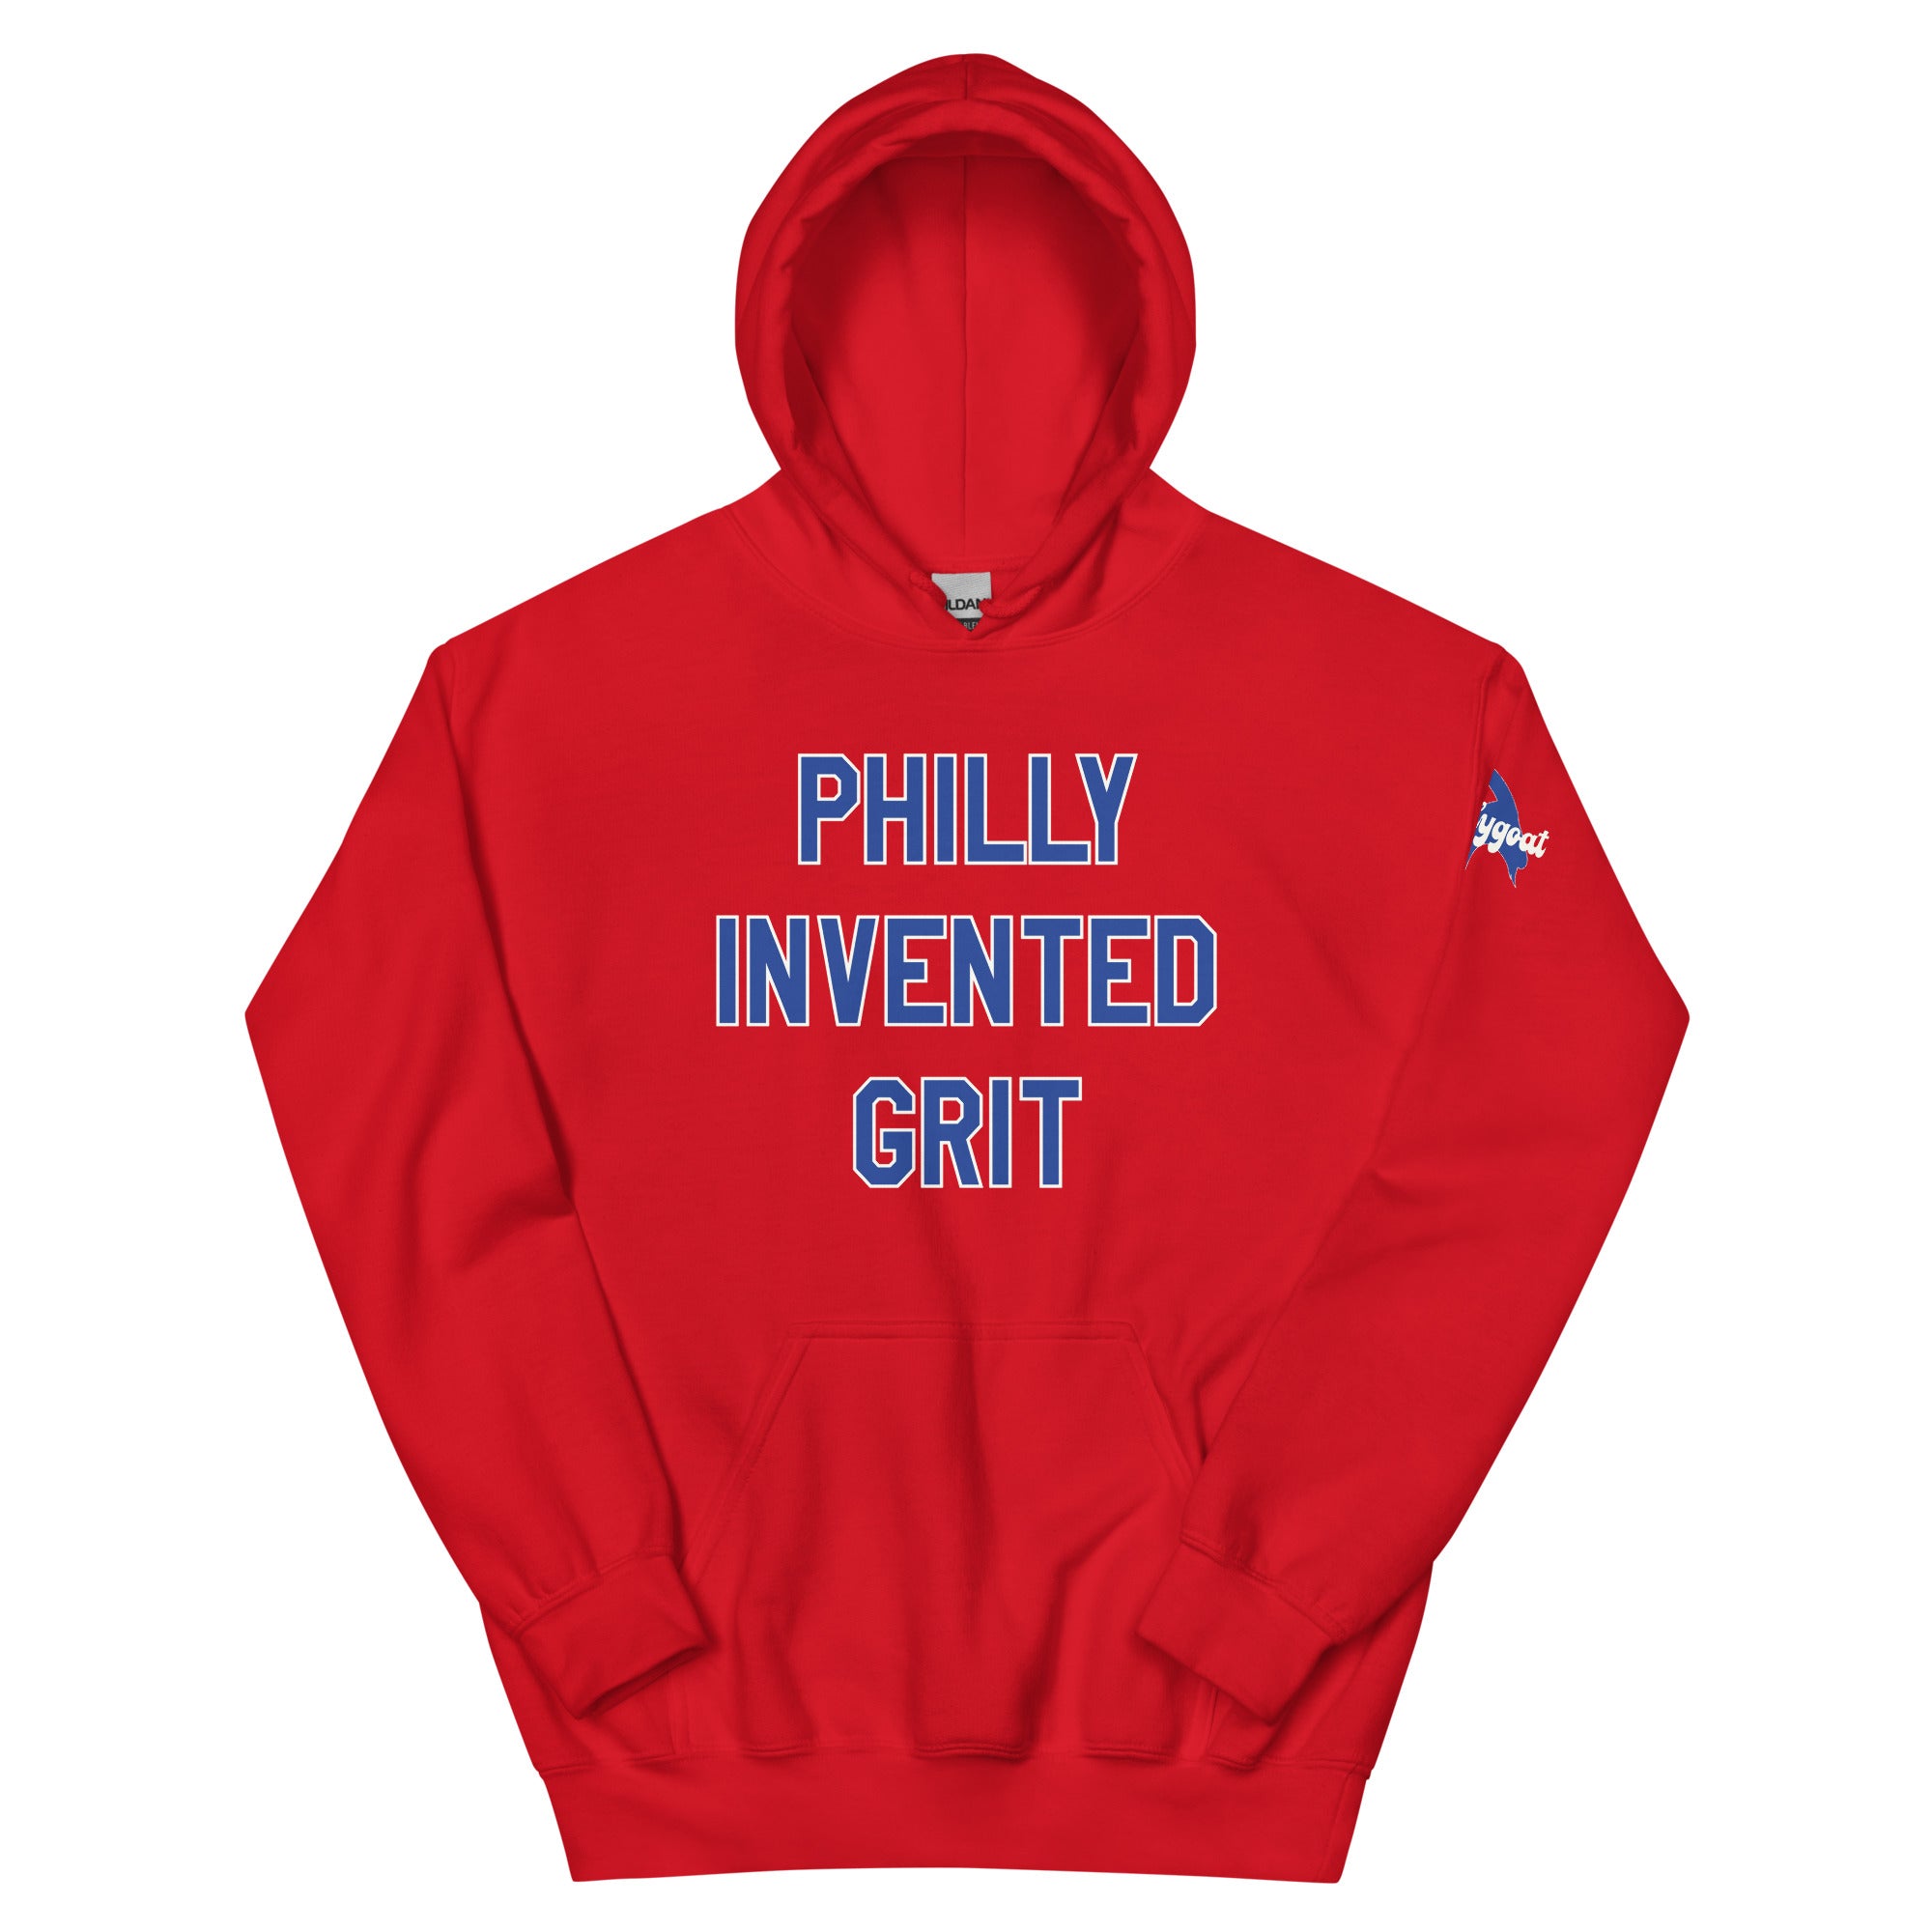 Philadelphia Phillies 76ers philly invented grit red hoodie Phillygoat